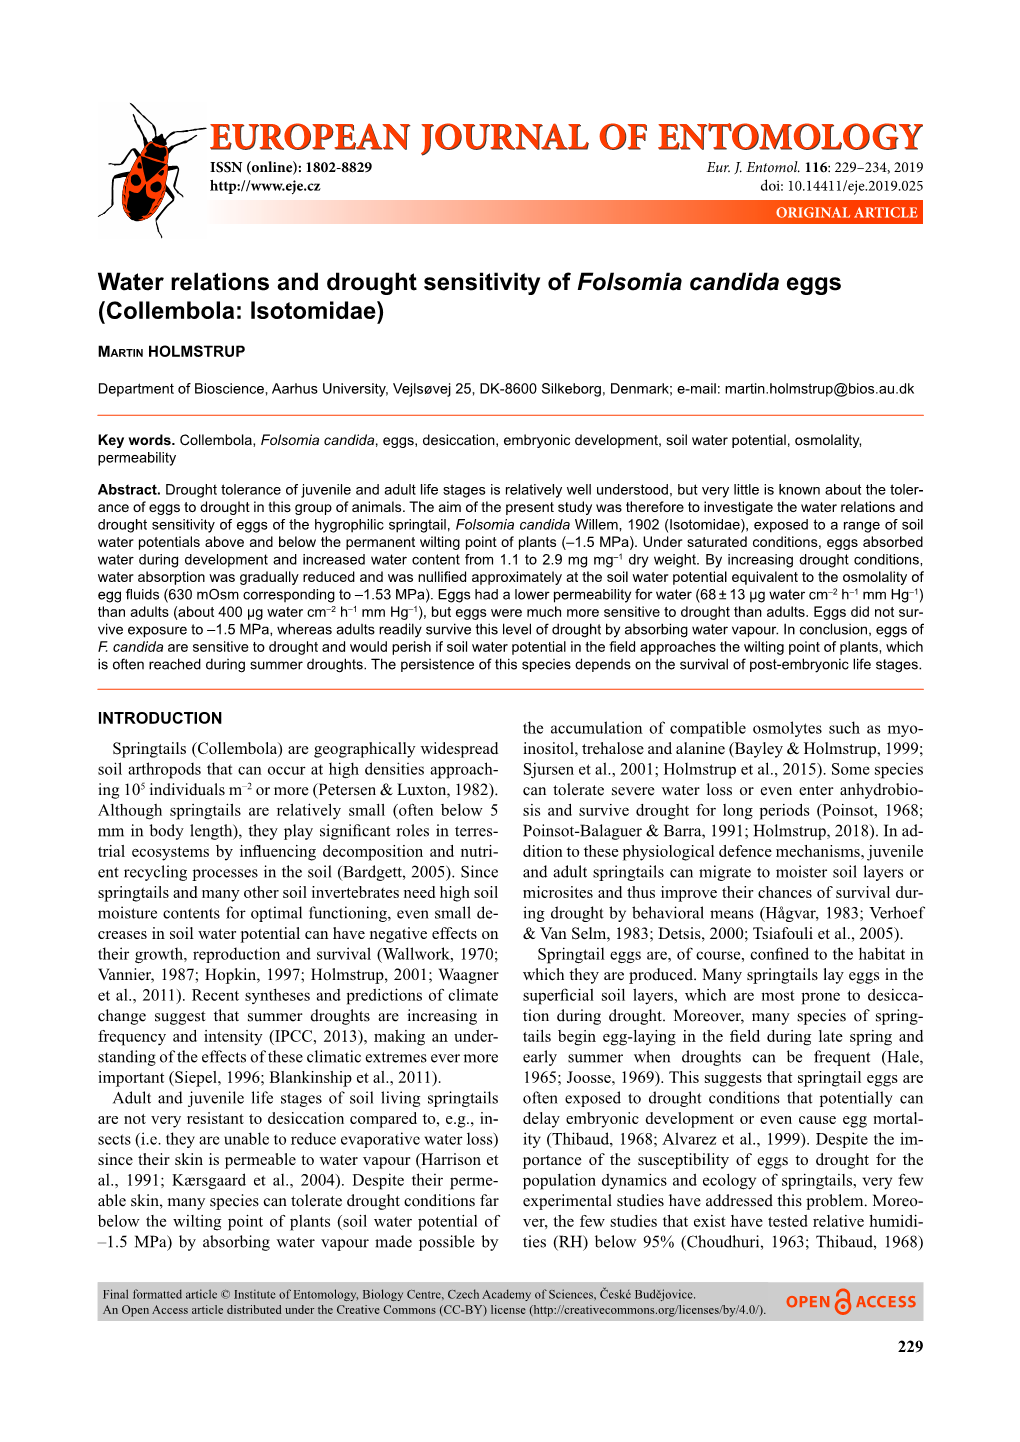 Water Relations and Drought Sensitivity of Folsomia Candida Eggs (Collembola: Isotomidae)